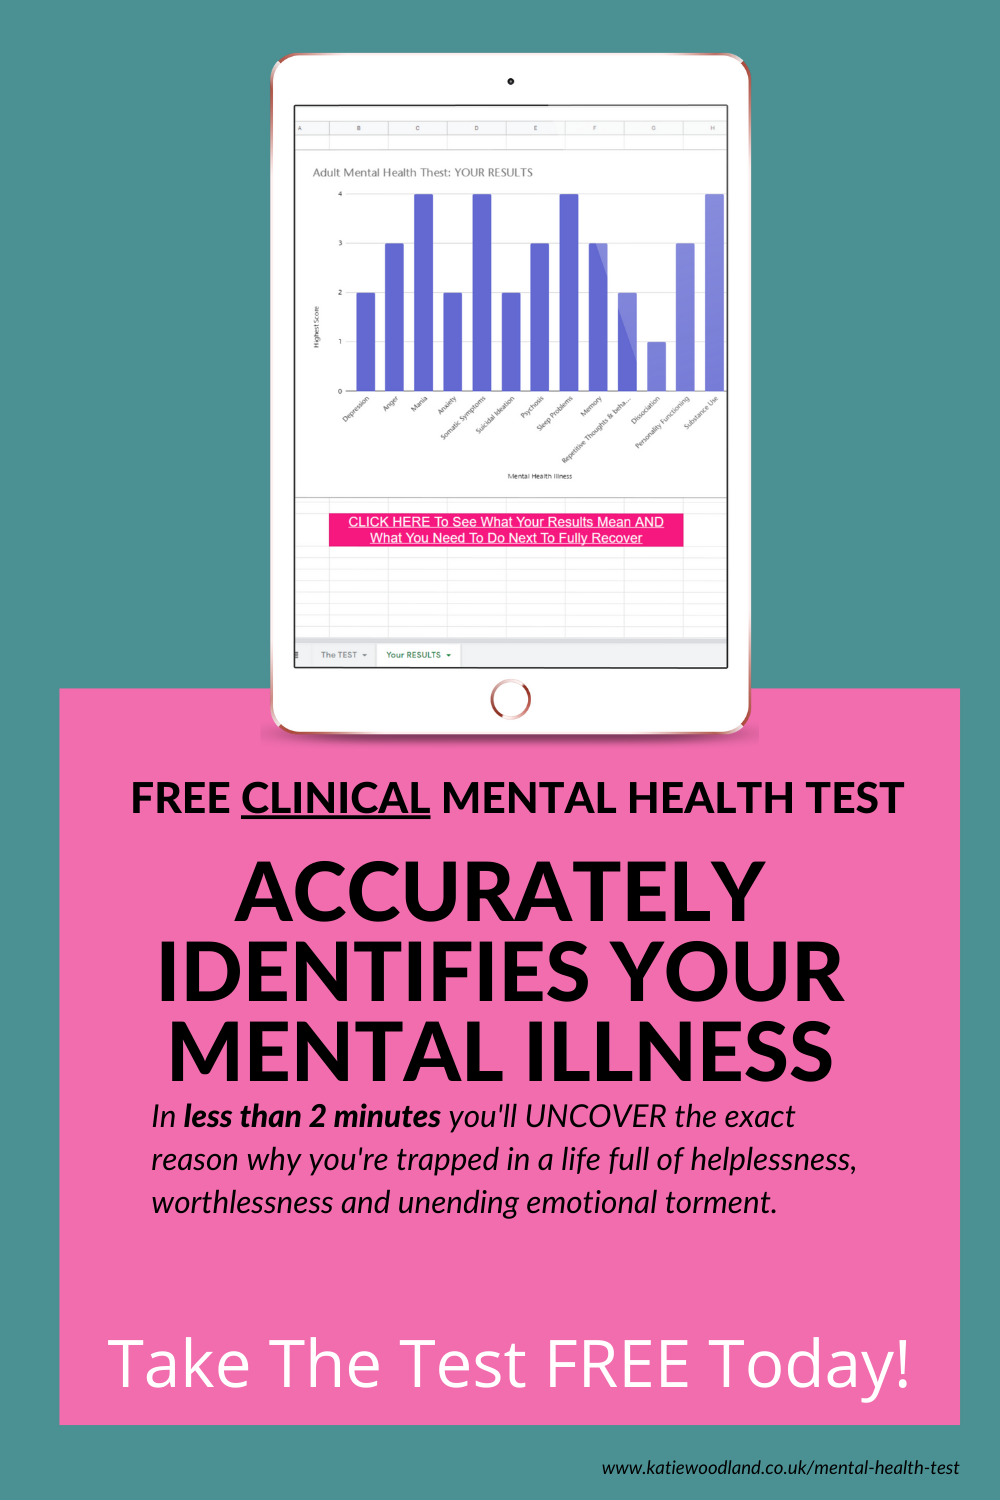 FREE Clinincal Mental Health Test ACCURATELY Identifies Your Mental Illness In Under 2 Minutes AND Gives You The Next Steps You Need To Take To Recover!